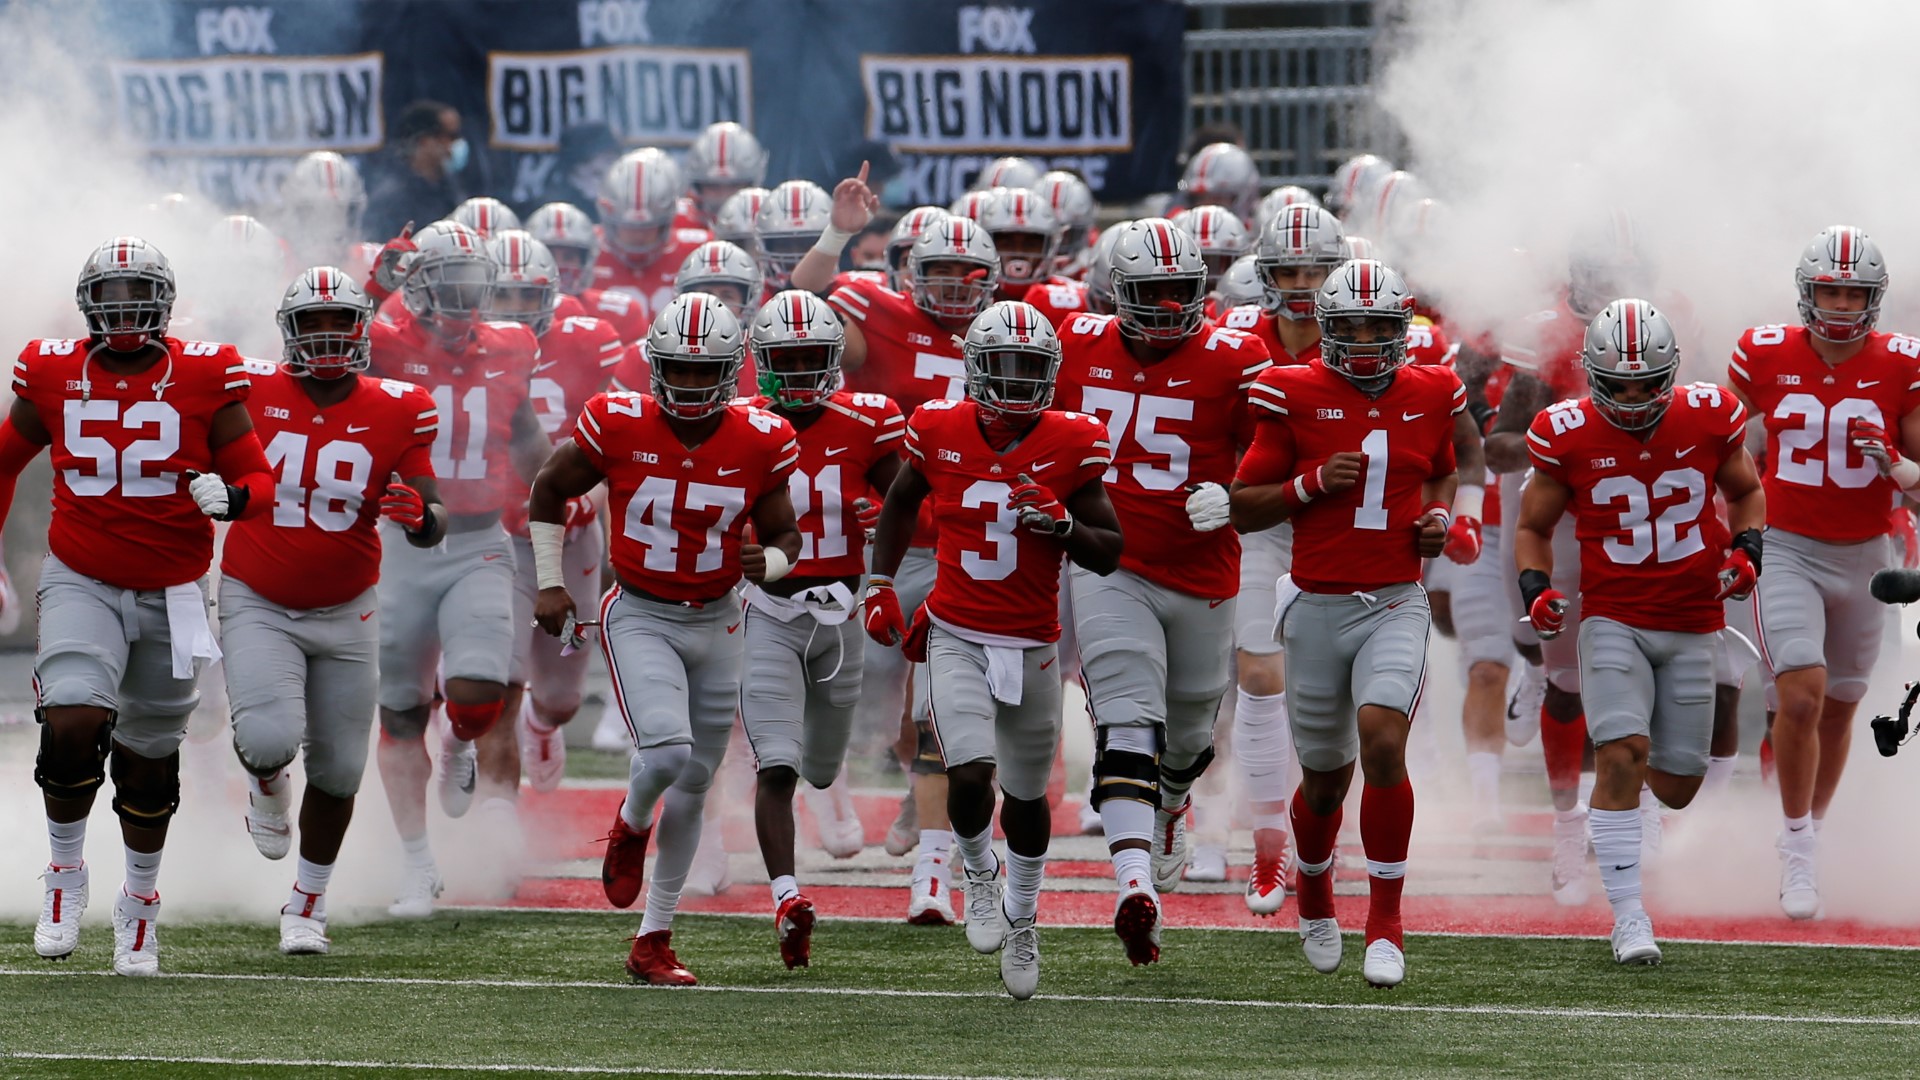 Ohio State Michigan State game is a go for Saturday, confident team can safely compete 10tv